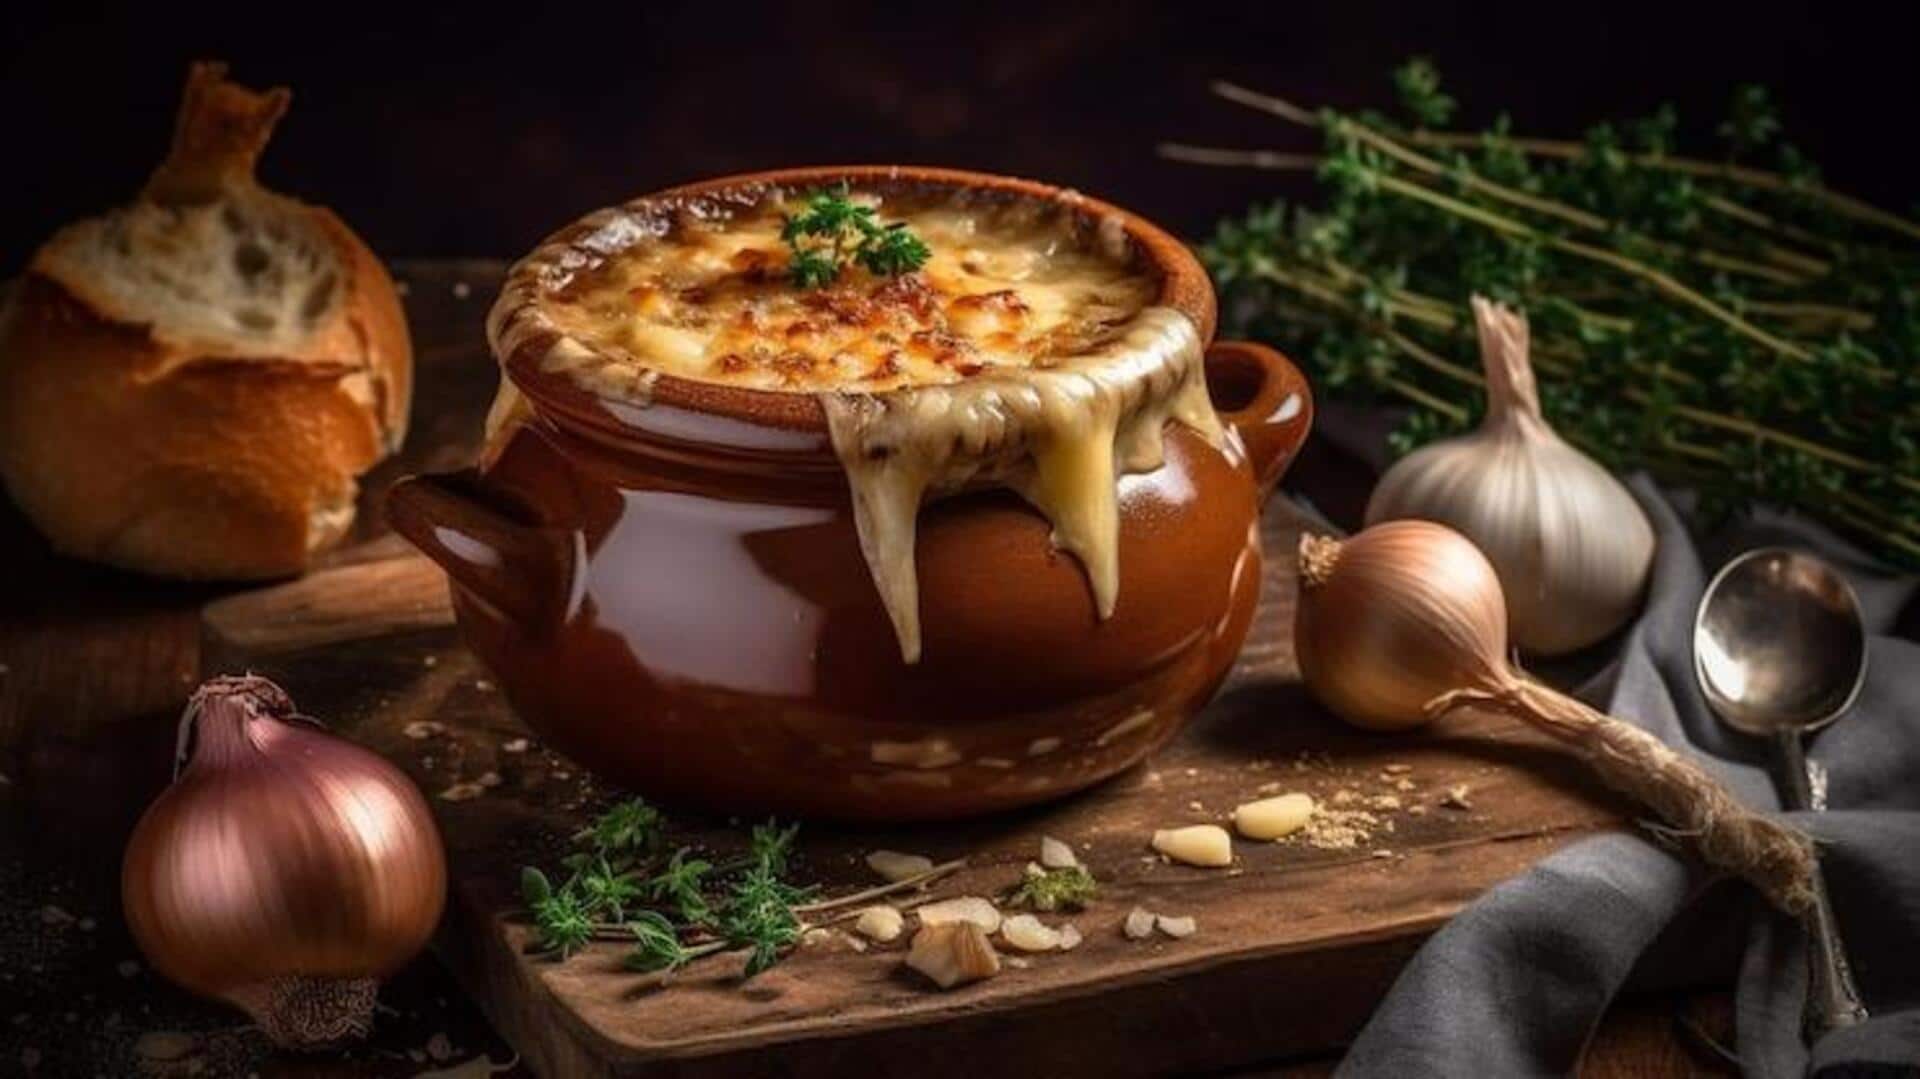 Try this classic French onion soup recipe today